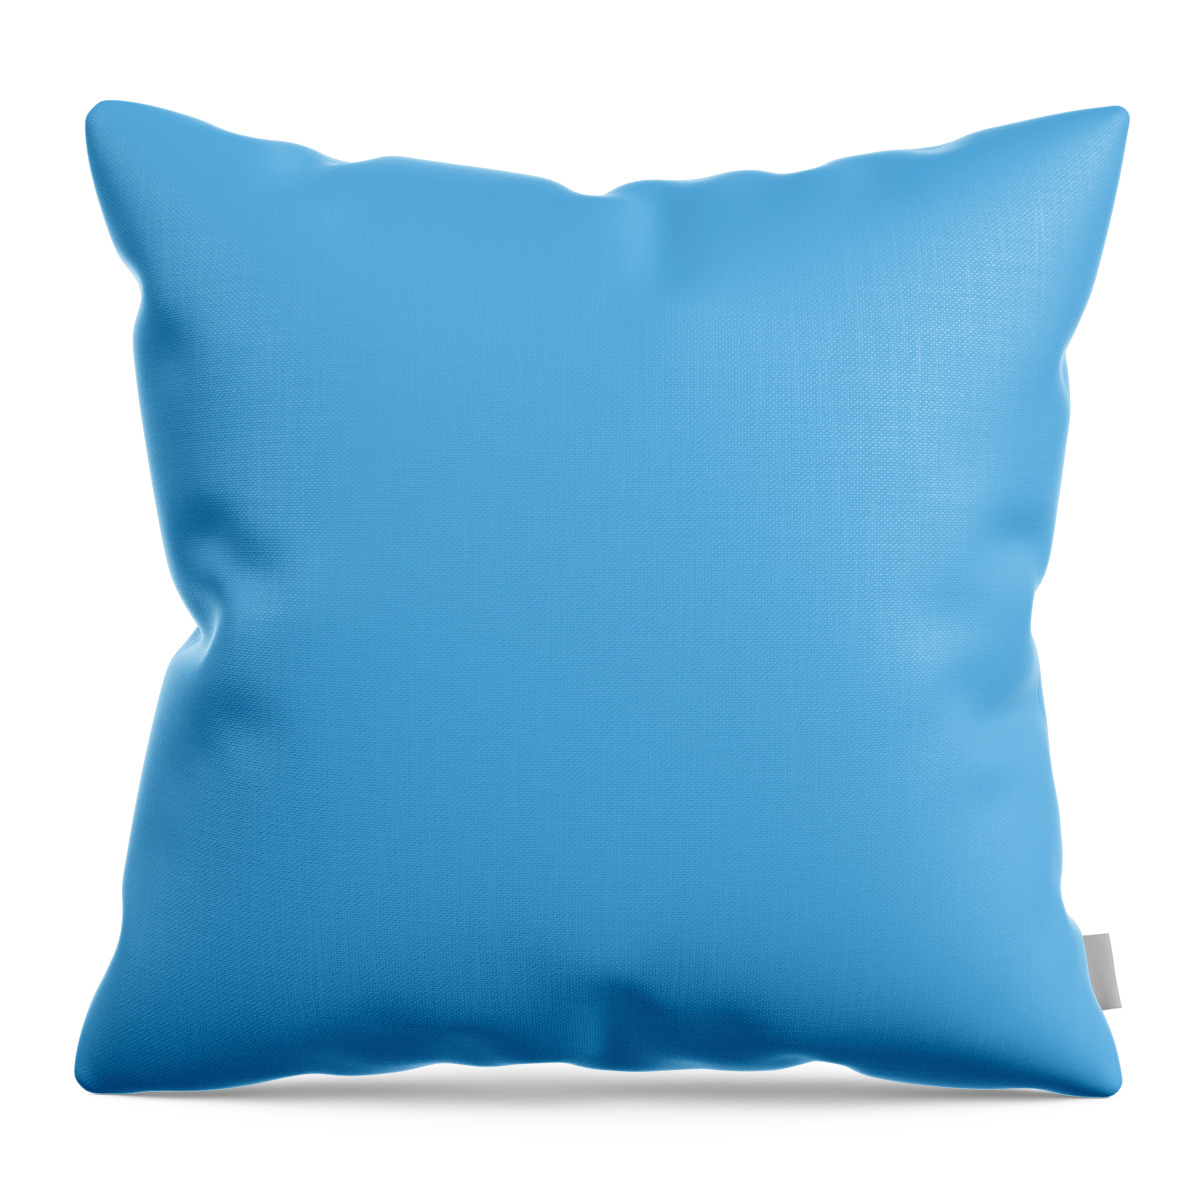 Solid Colors Throw Pillow featuring the digital art Solid Sky Blue by Garaga Designs